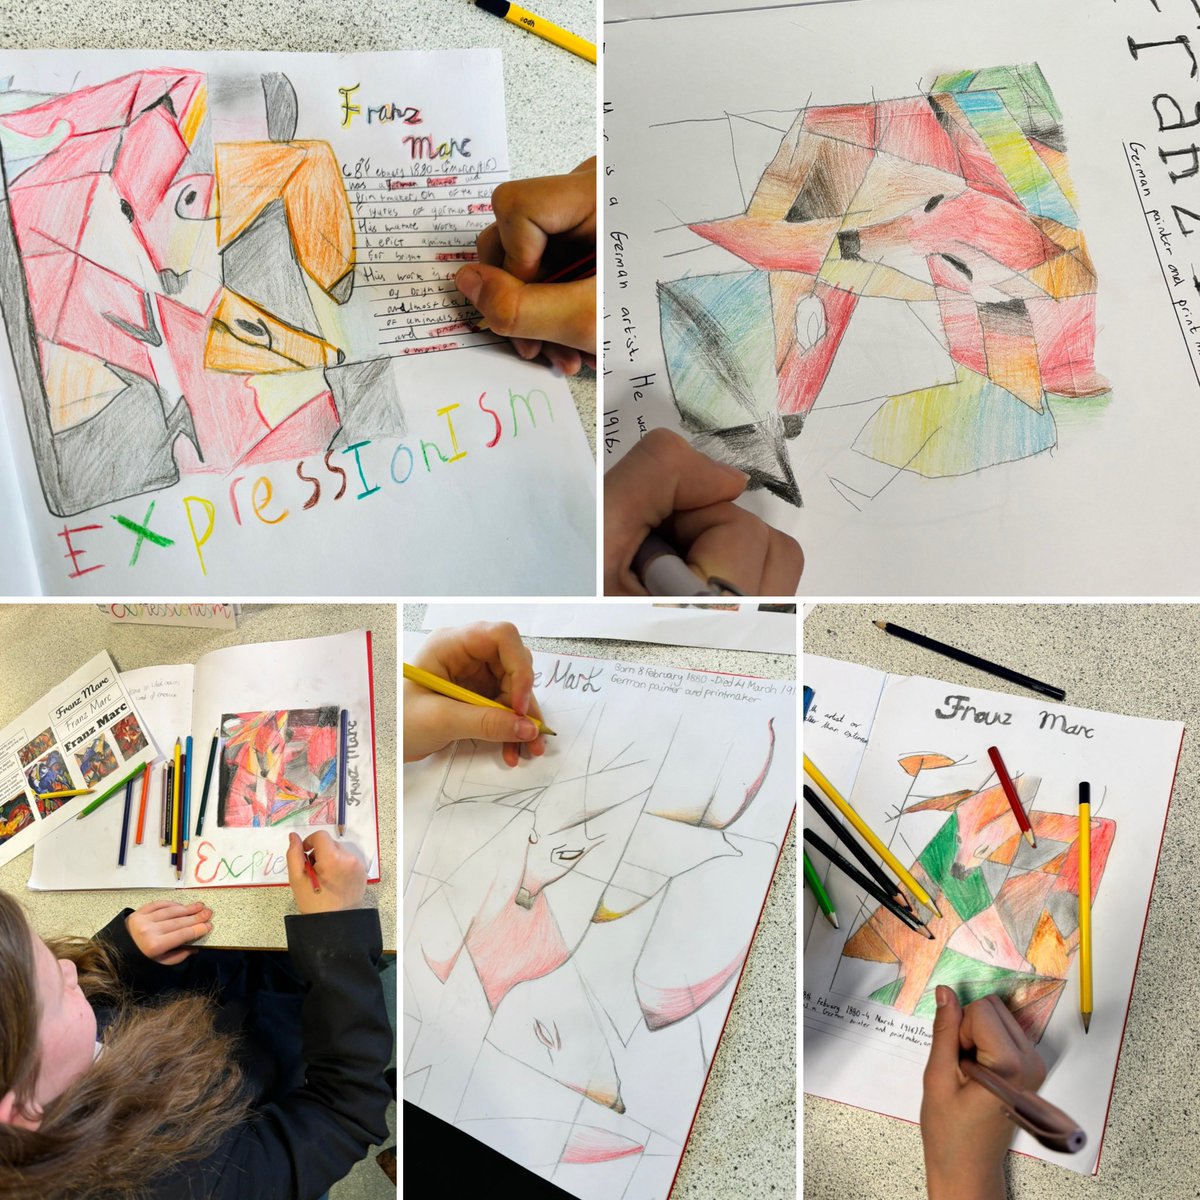 #TheFoxes 
Today our Year 7 Artists have been exploring the work Franz Marc. The quality of work produced is simply stunning #Emotive  #Expressionism #Artiststudy #Criticalstudies #NewLearning